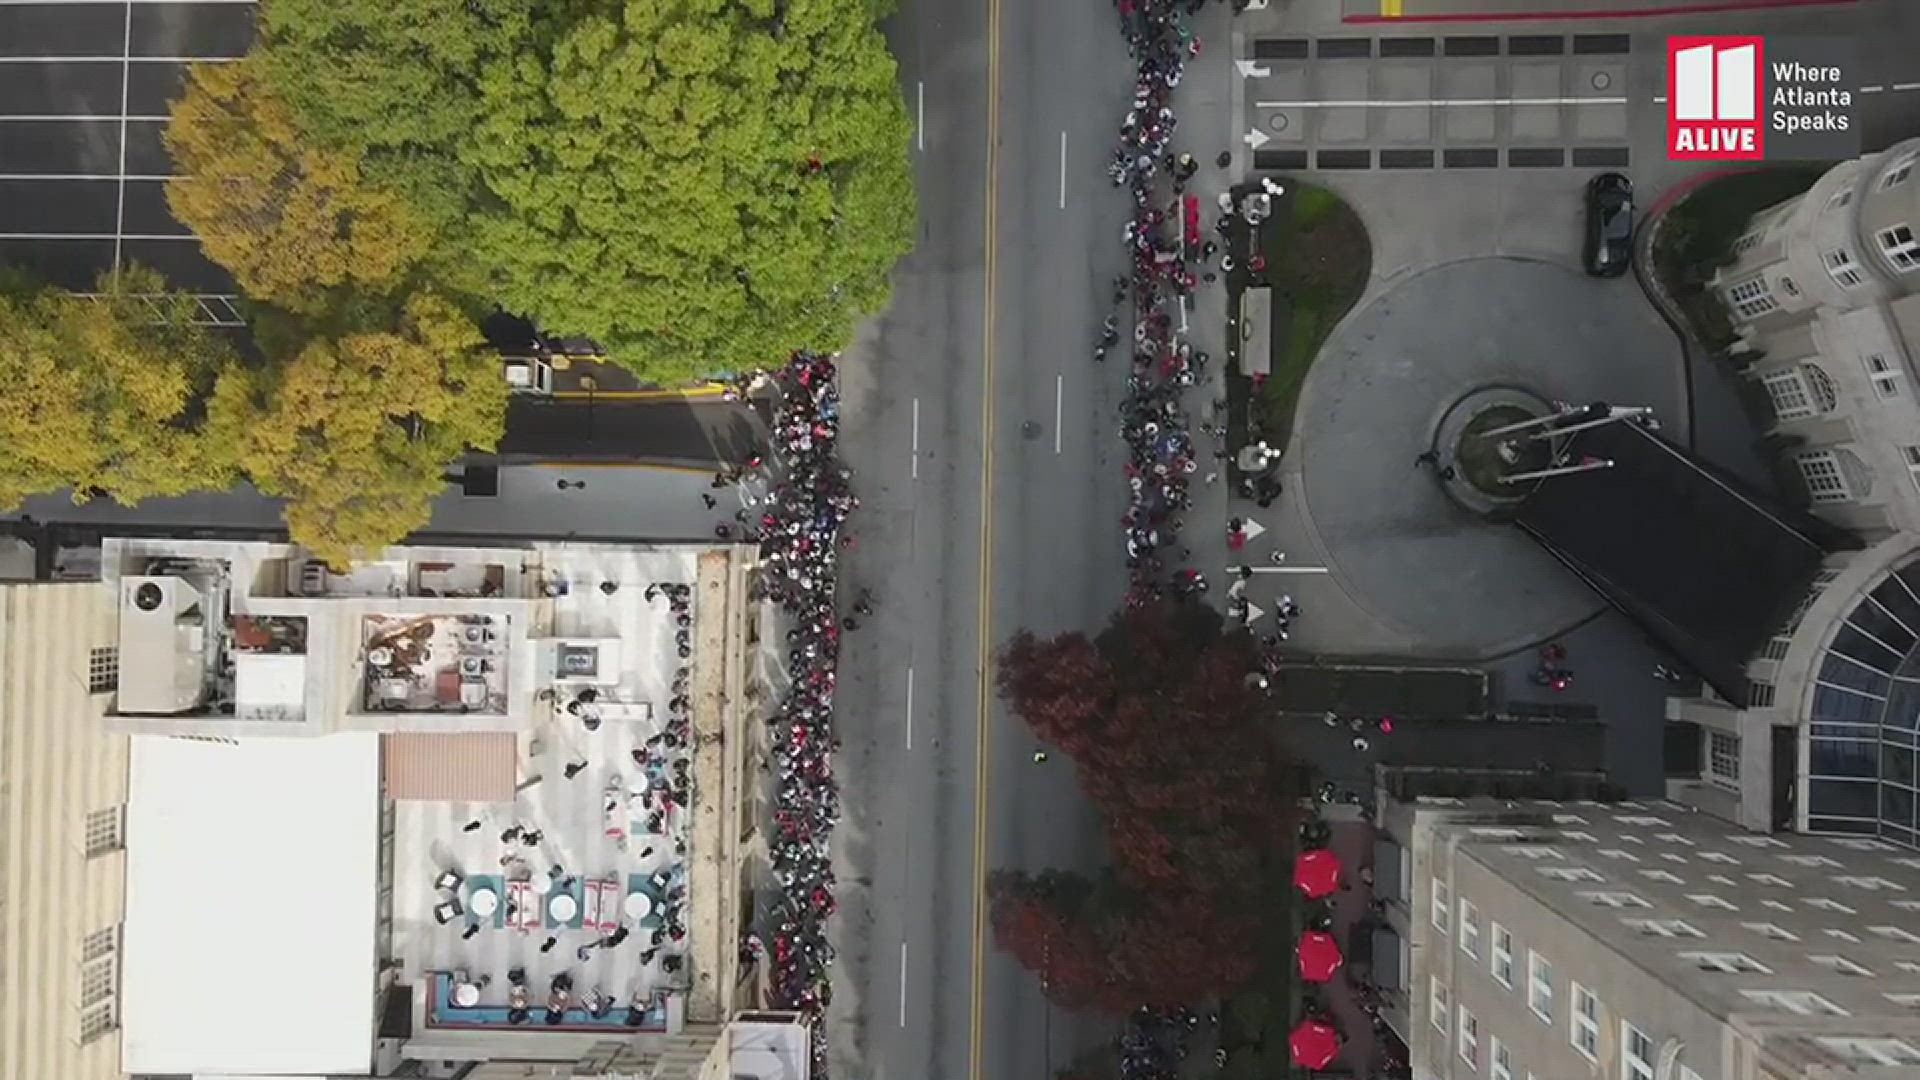 Drone video shows the Braves World Series Championship Parade as it rolled past the Fox Theatre on Peachtree St. in Atlanta.